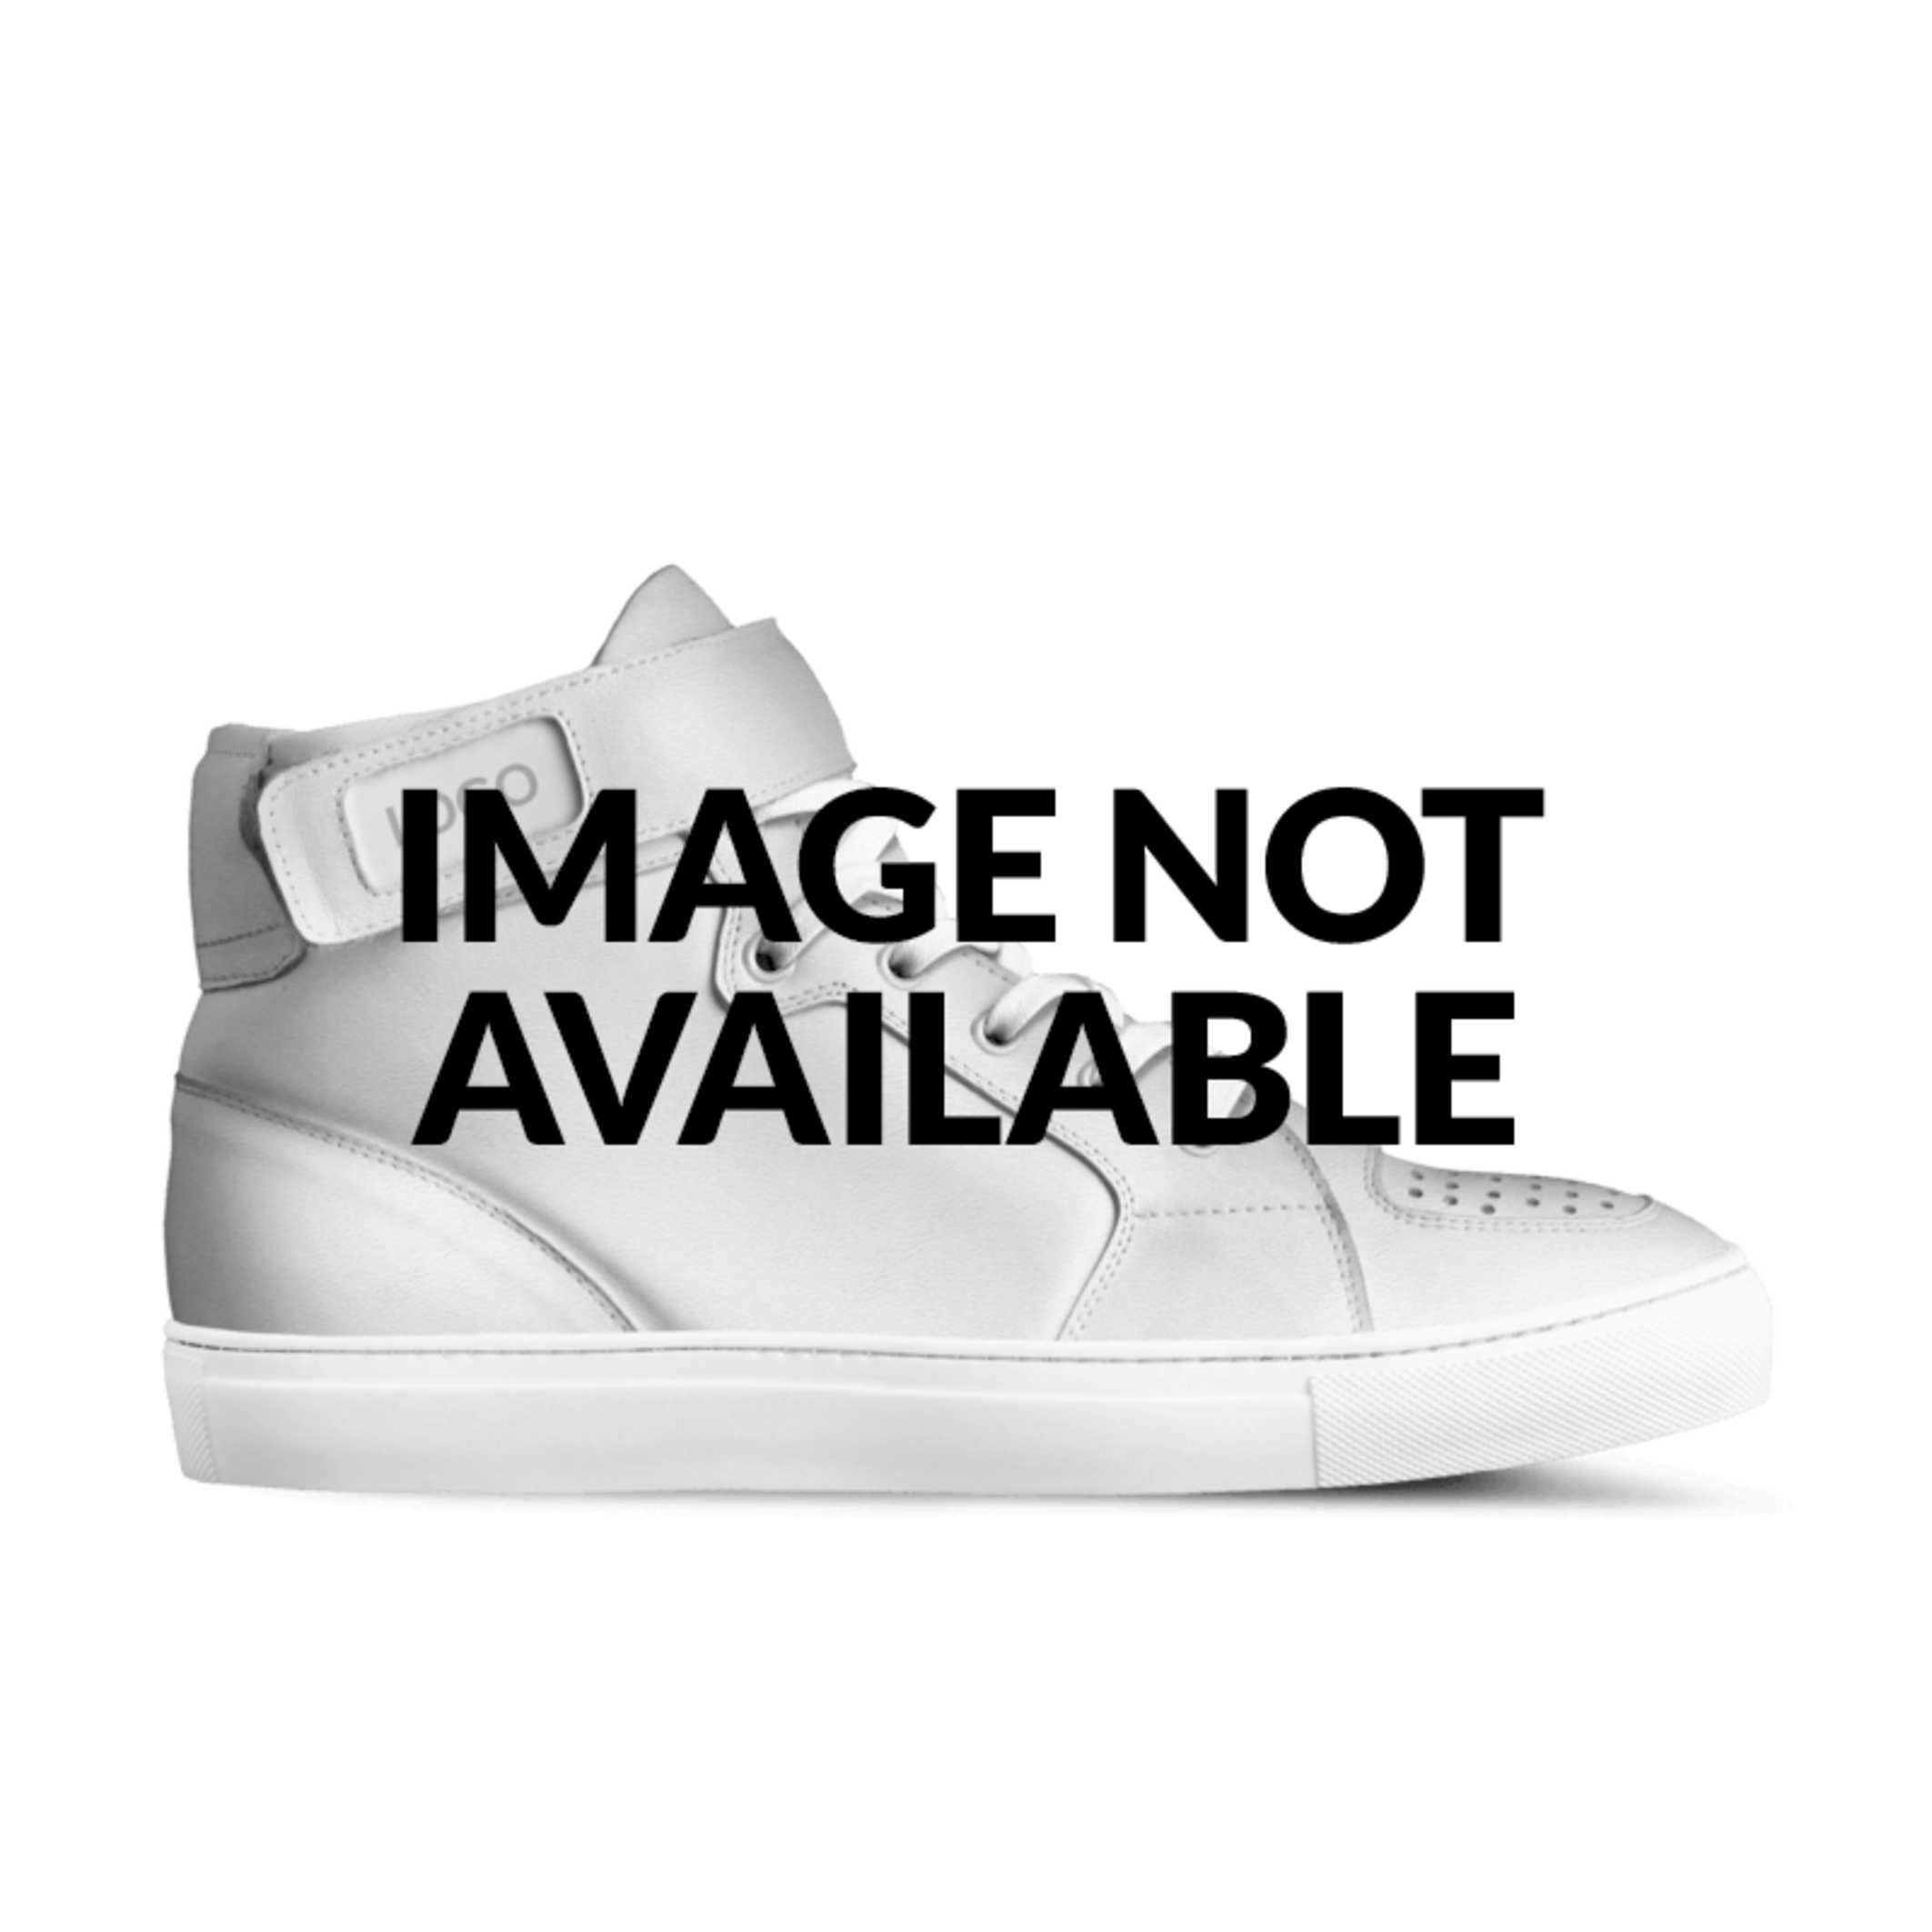 Majure X Grey Hi custom made in Italy shoes by Donway Enterprises | Box view